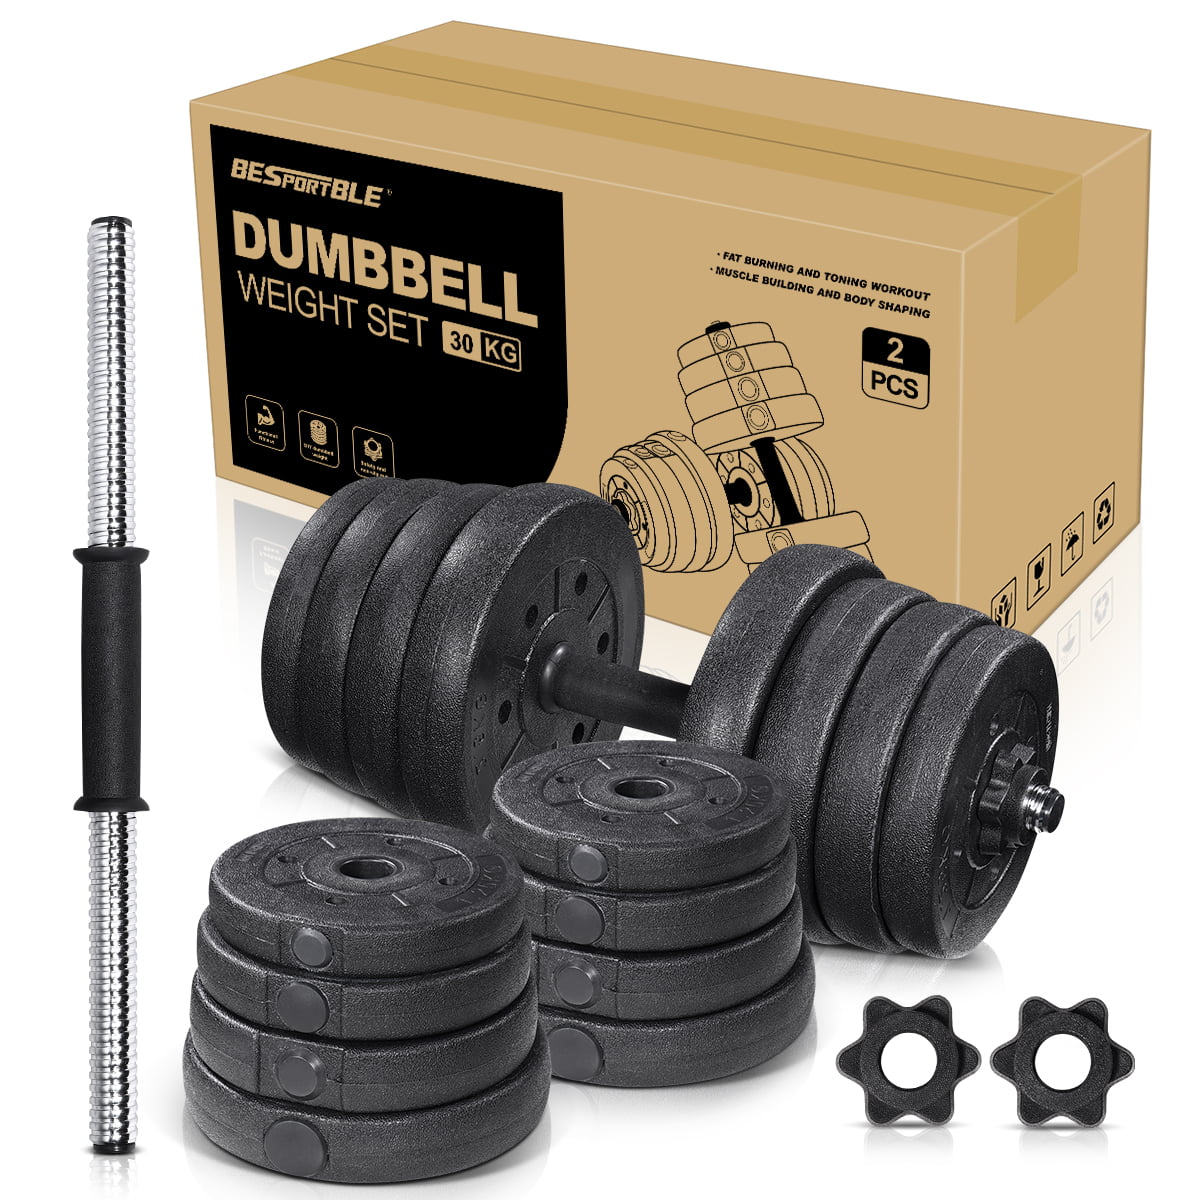 Details about   66lb Dumbbell Set Adjustable Dumbbells Weights Cap 30kg NEW Weight Pair Home Gym 